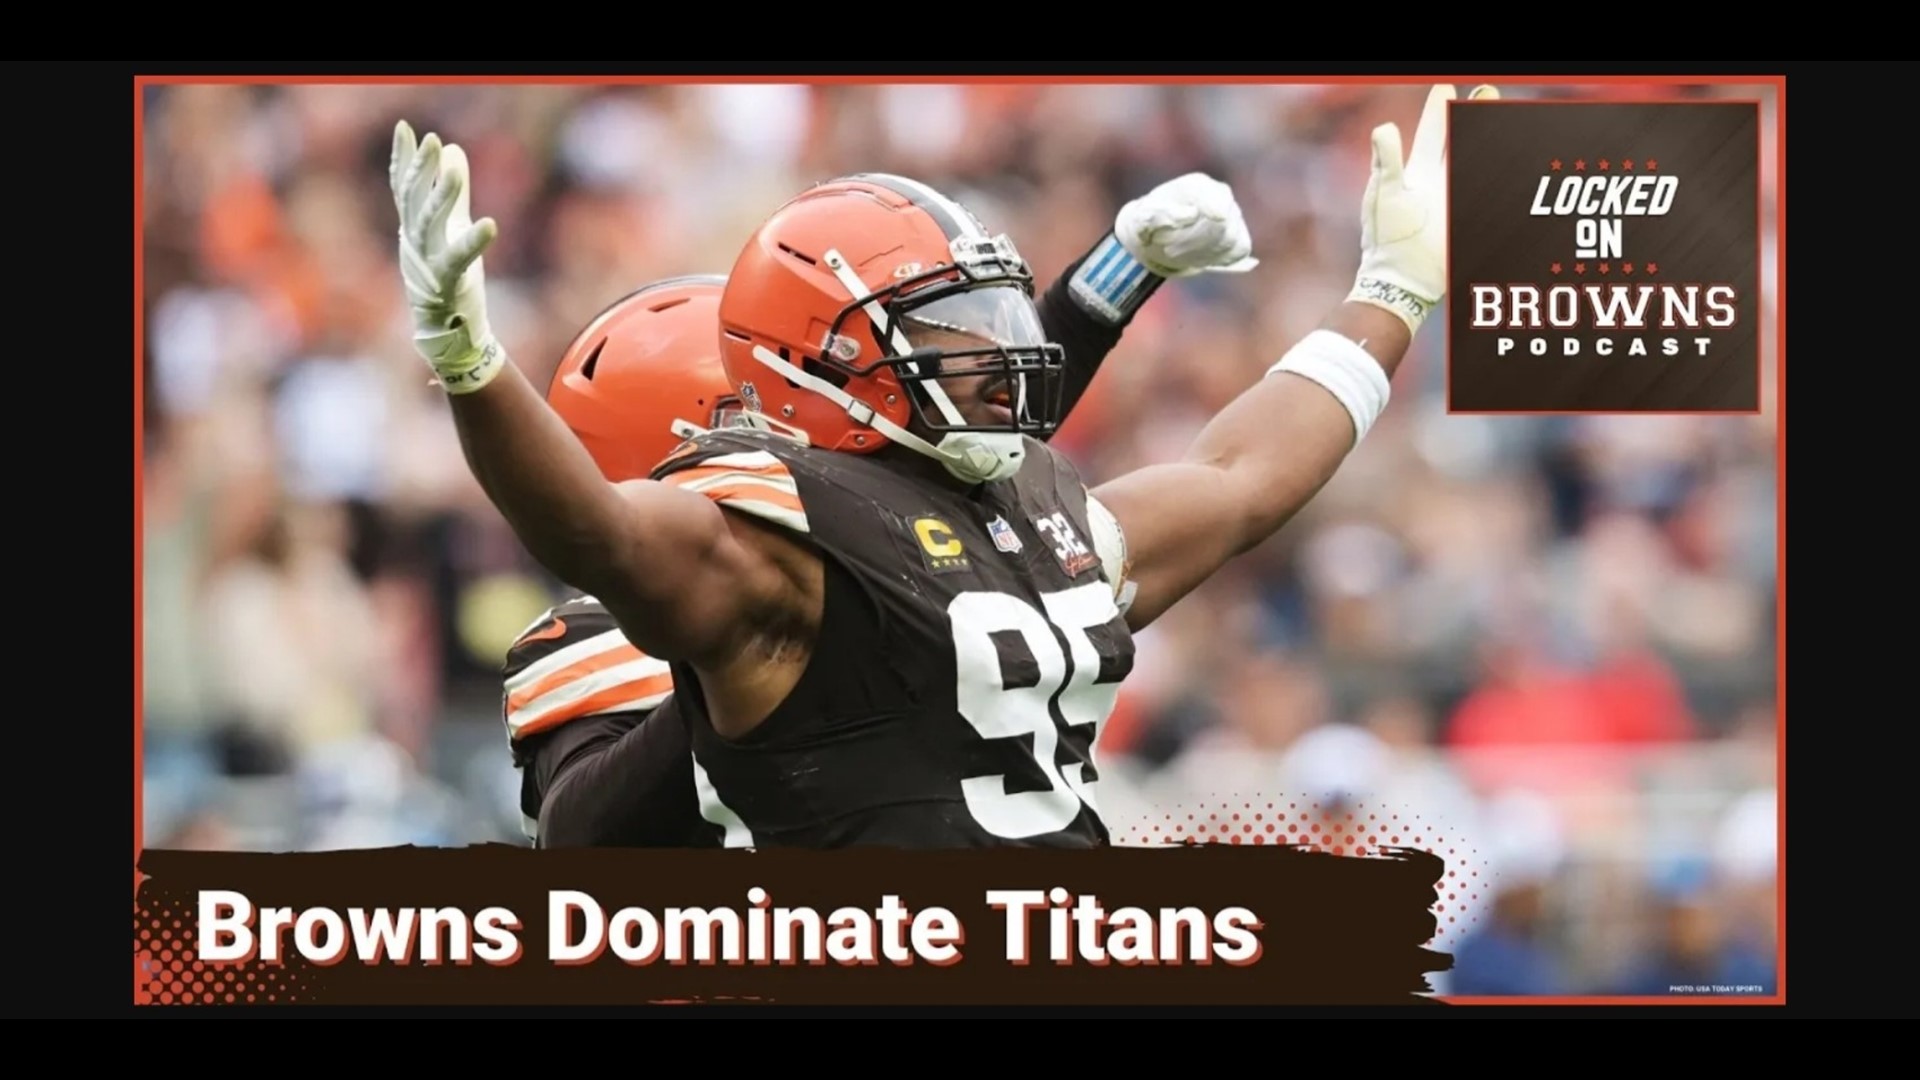 The Cleveland Browns lead by Deshaun Watson and Myles Garrett totally dominate the Tennessee Titans to move into a tie for first place in the AFC North.